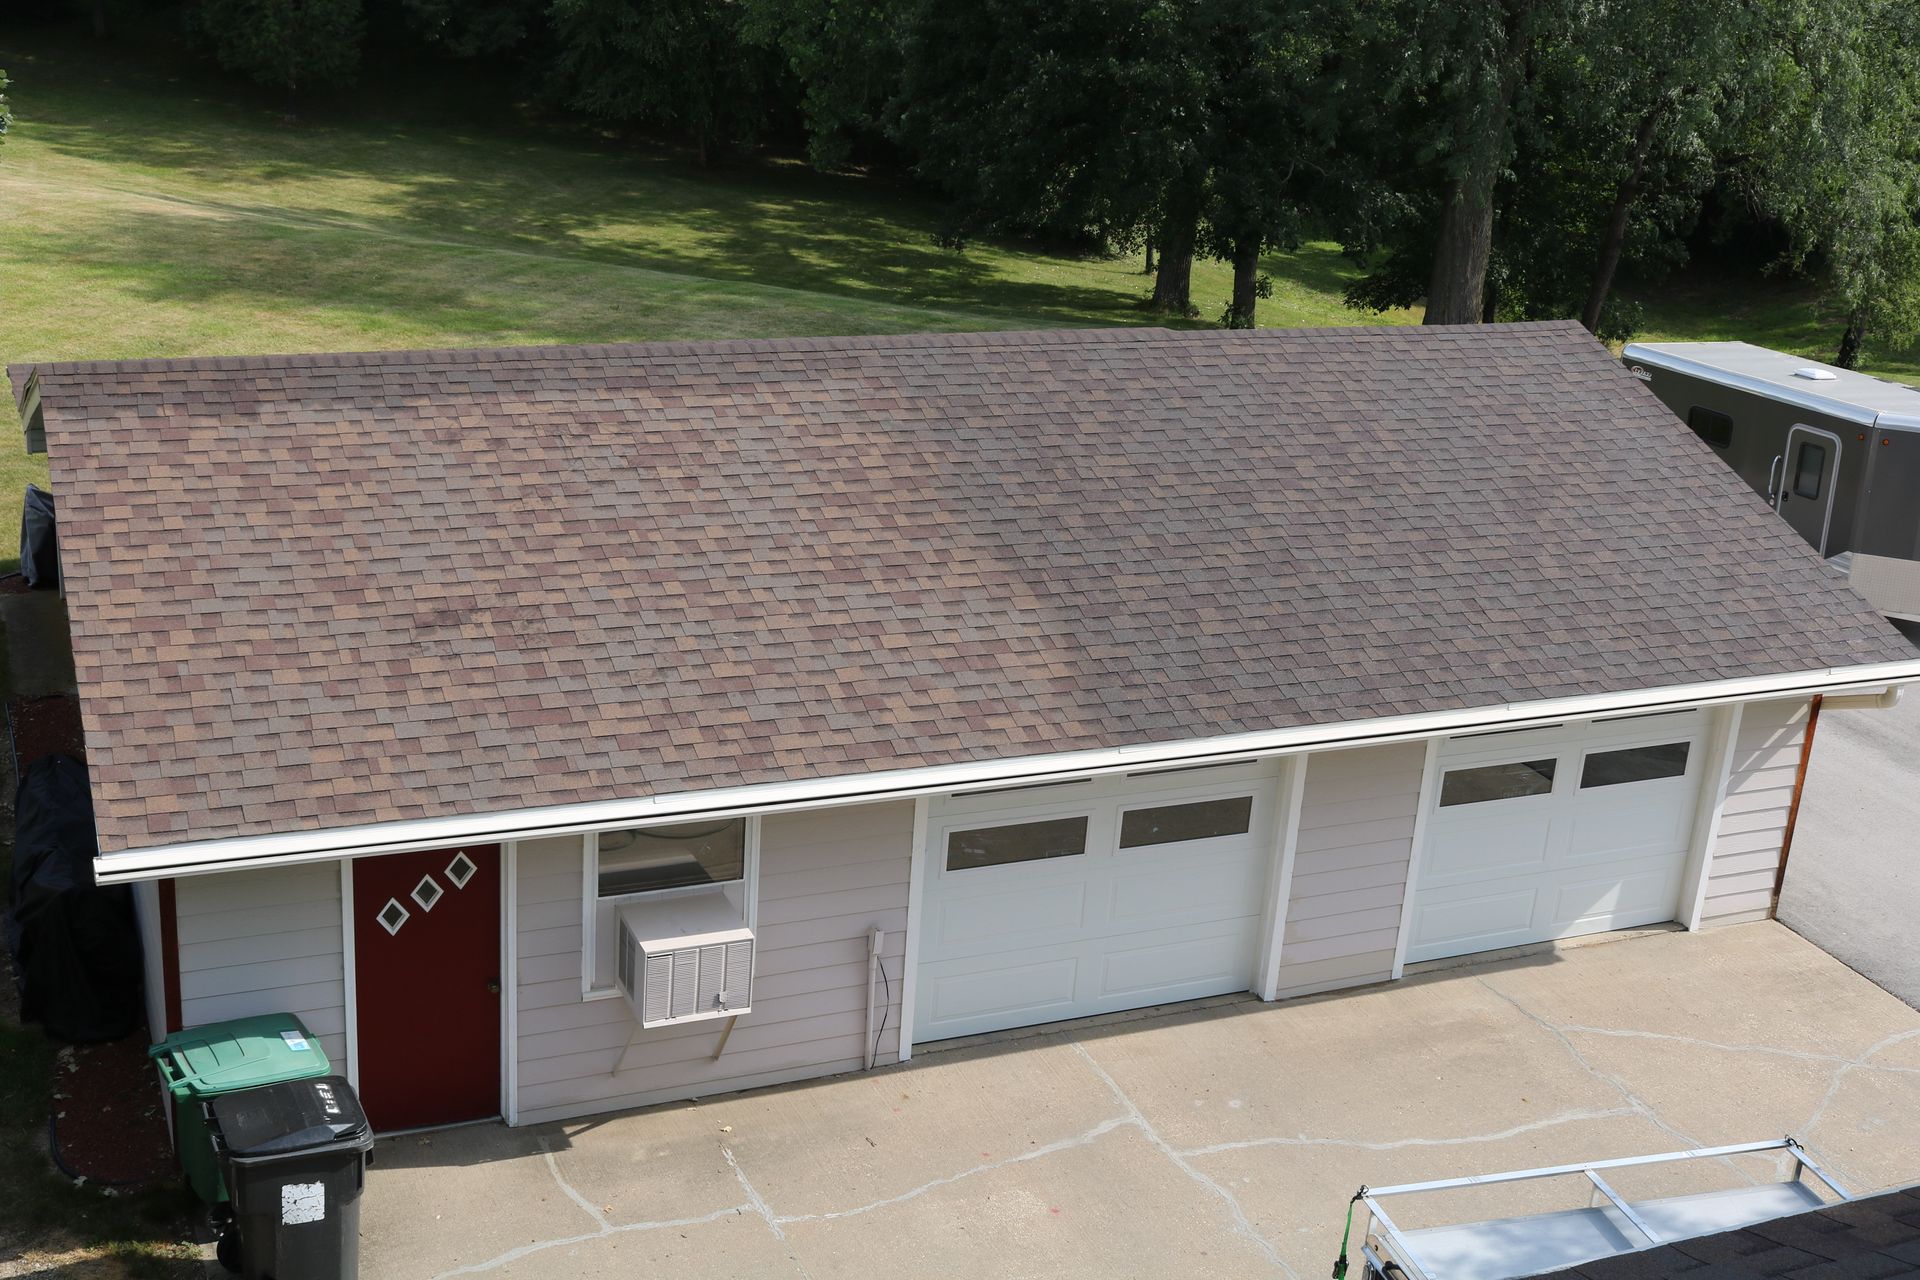 An aerial view of a garage with a brown roof.